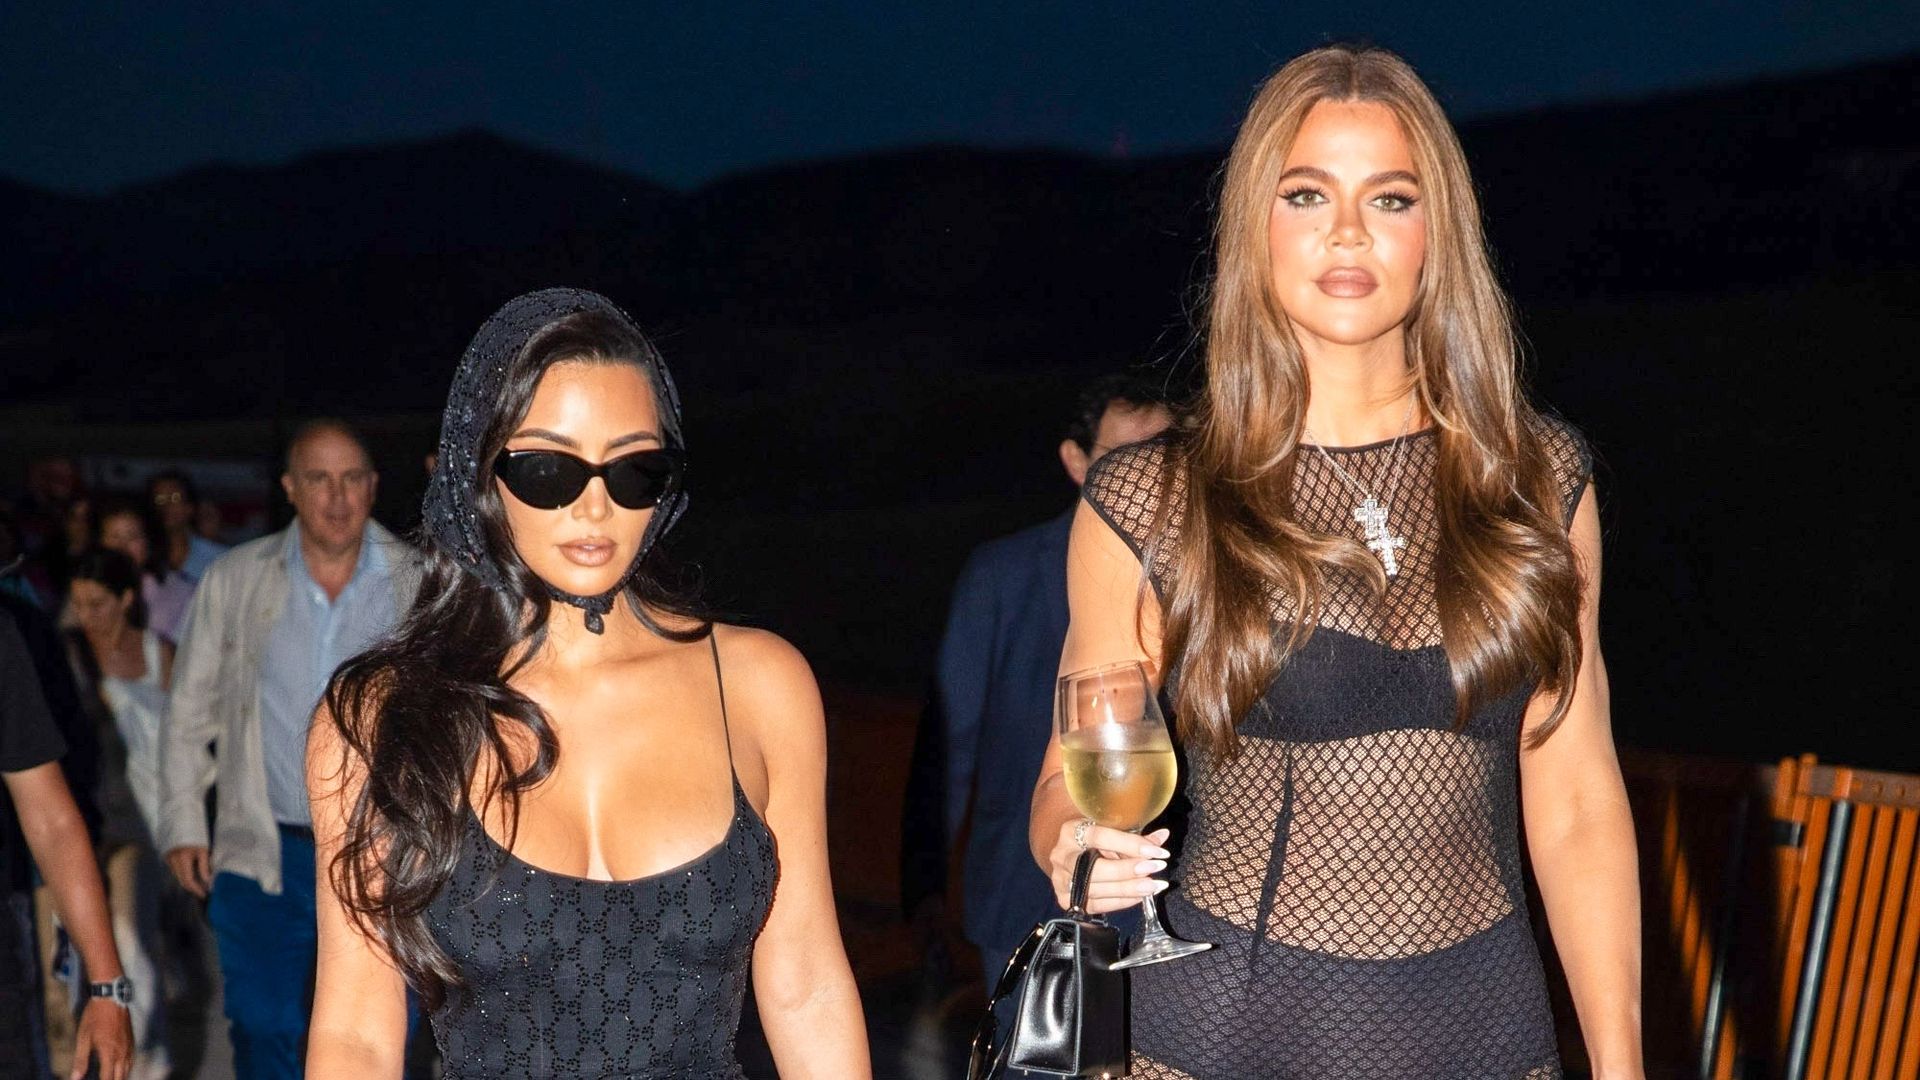 Kim and Khloé Kardashian's looks in Italy, including sheer mesh dress and chic headscarf